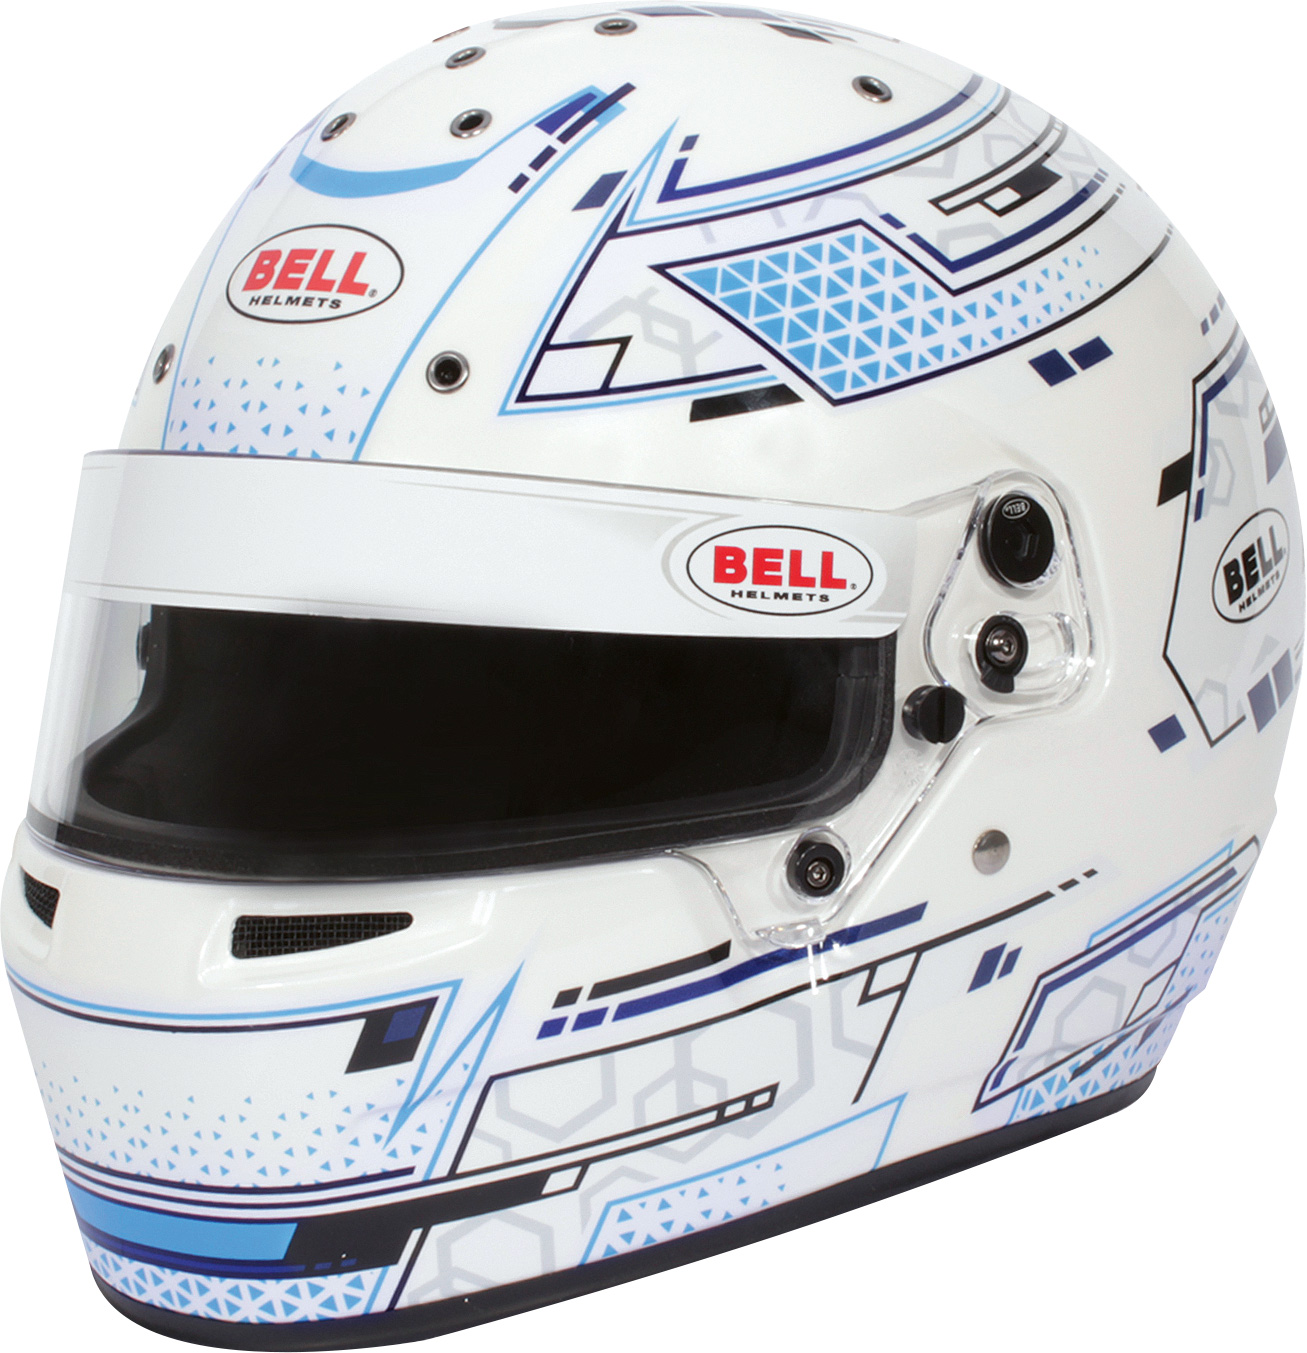 Bell Helm RS7-K